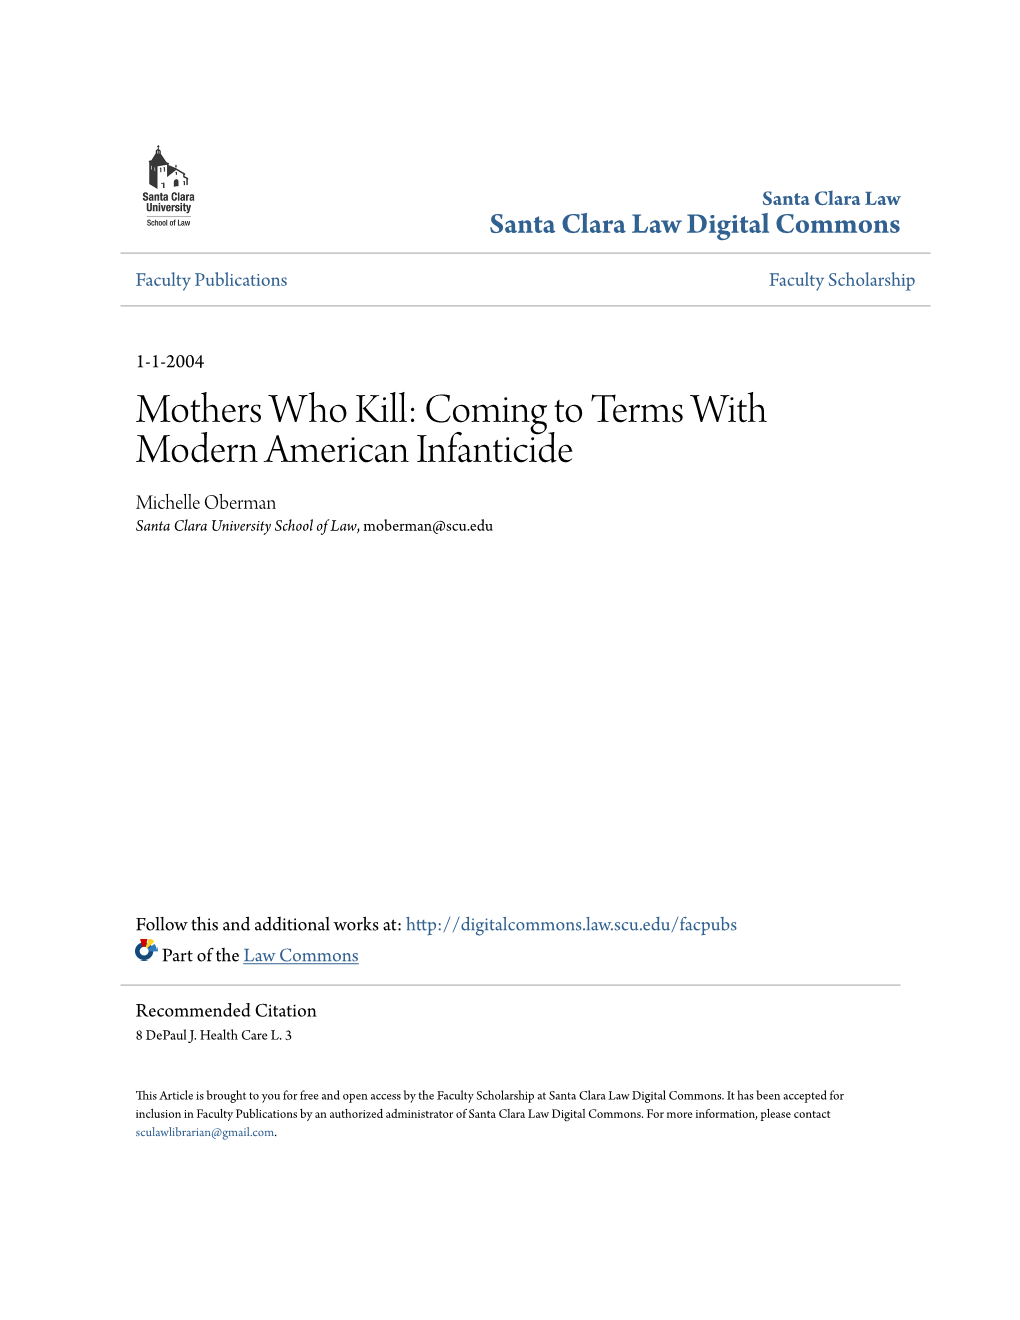 Mothers Who Kill: Coming to Terms with Modern American Infanticide Michelle Oberman Santa Clara University School of Law, Moberman@Scu.Edu